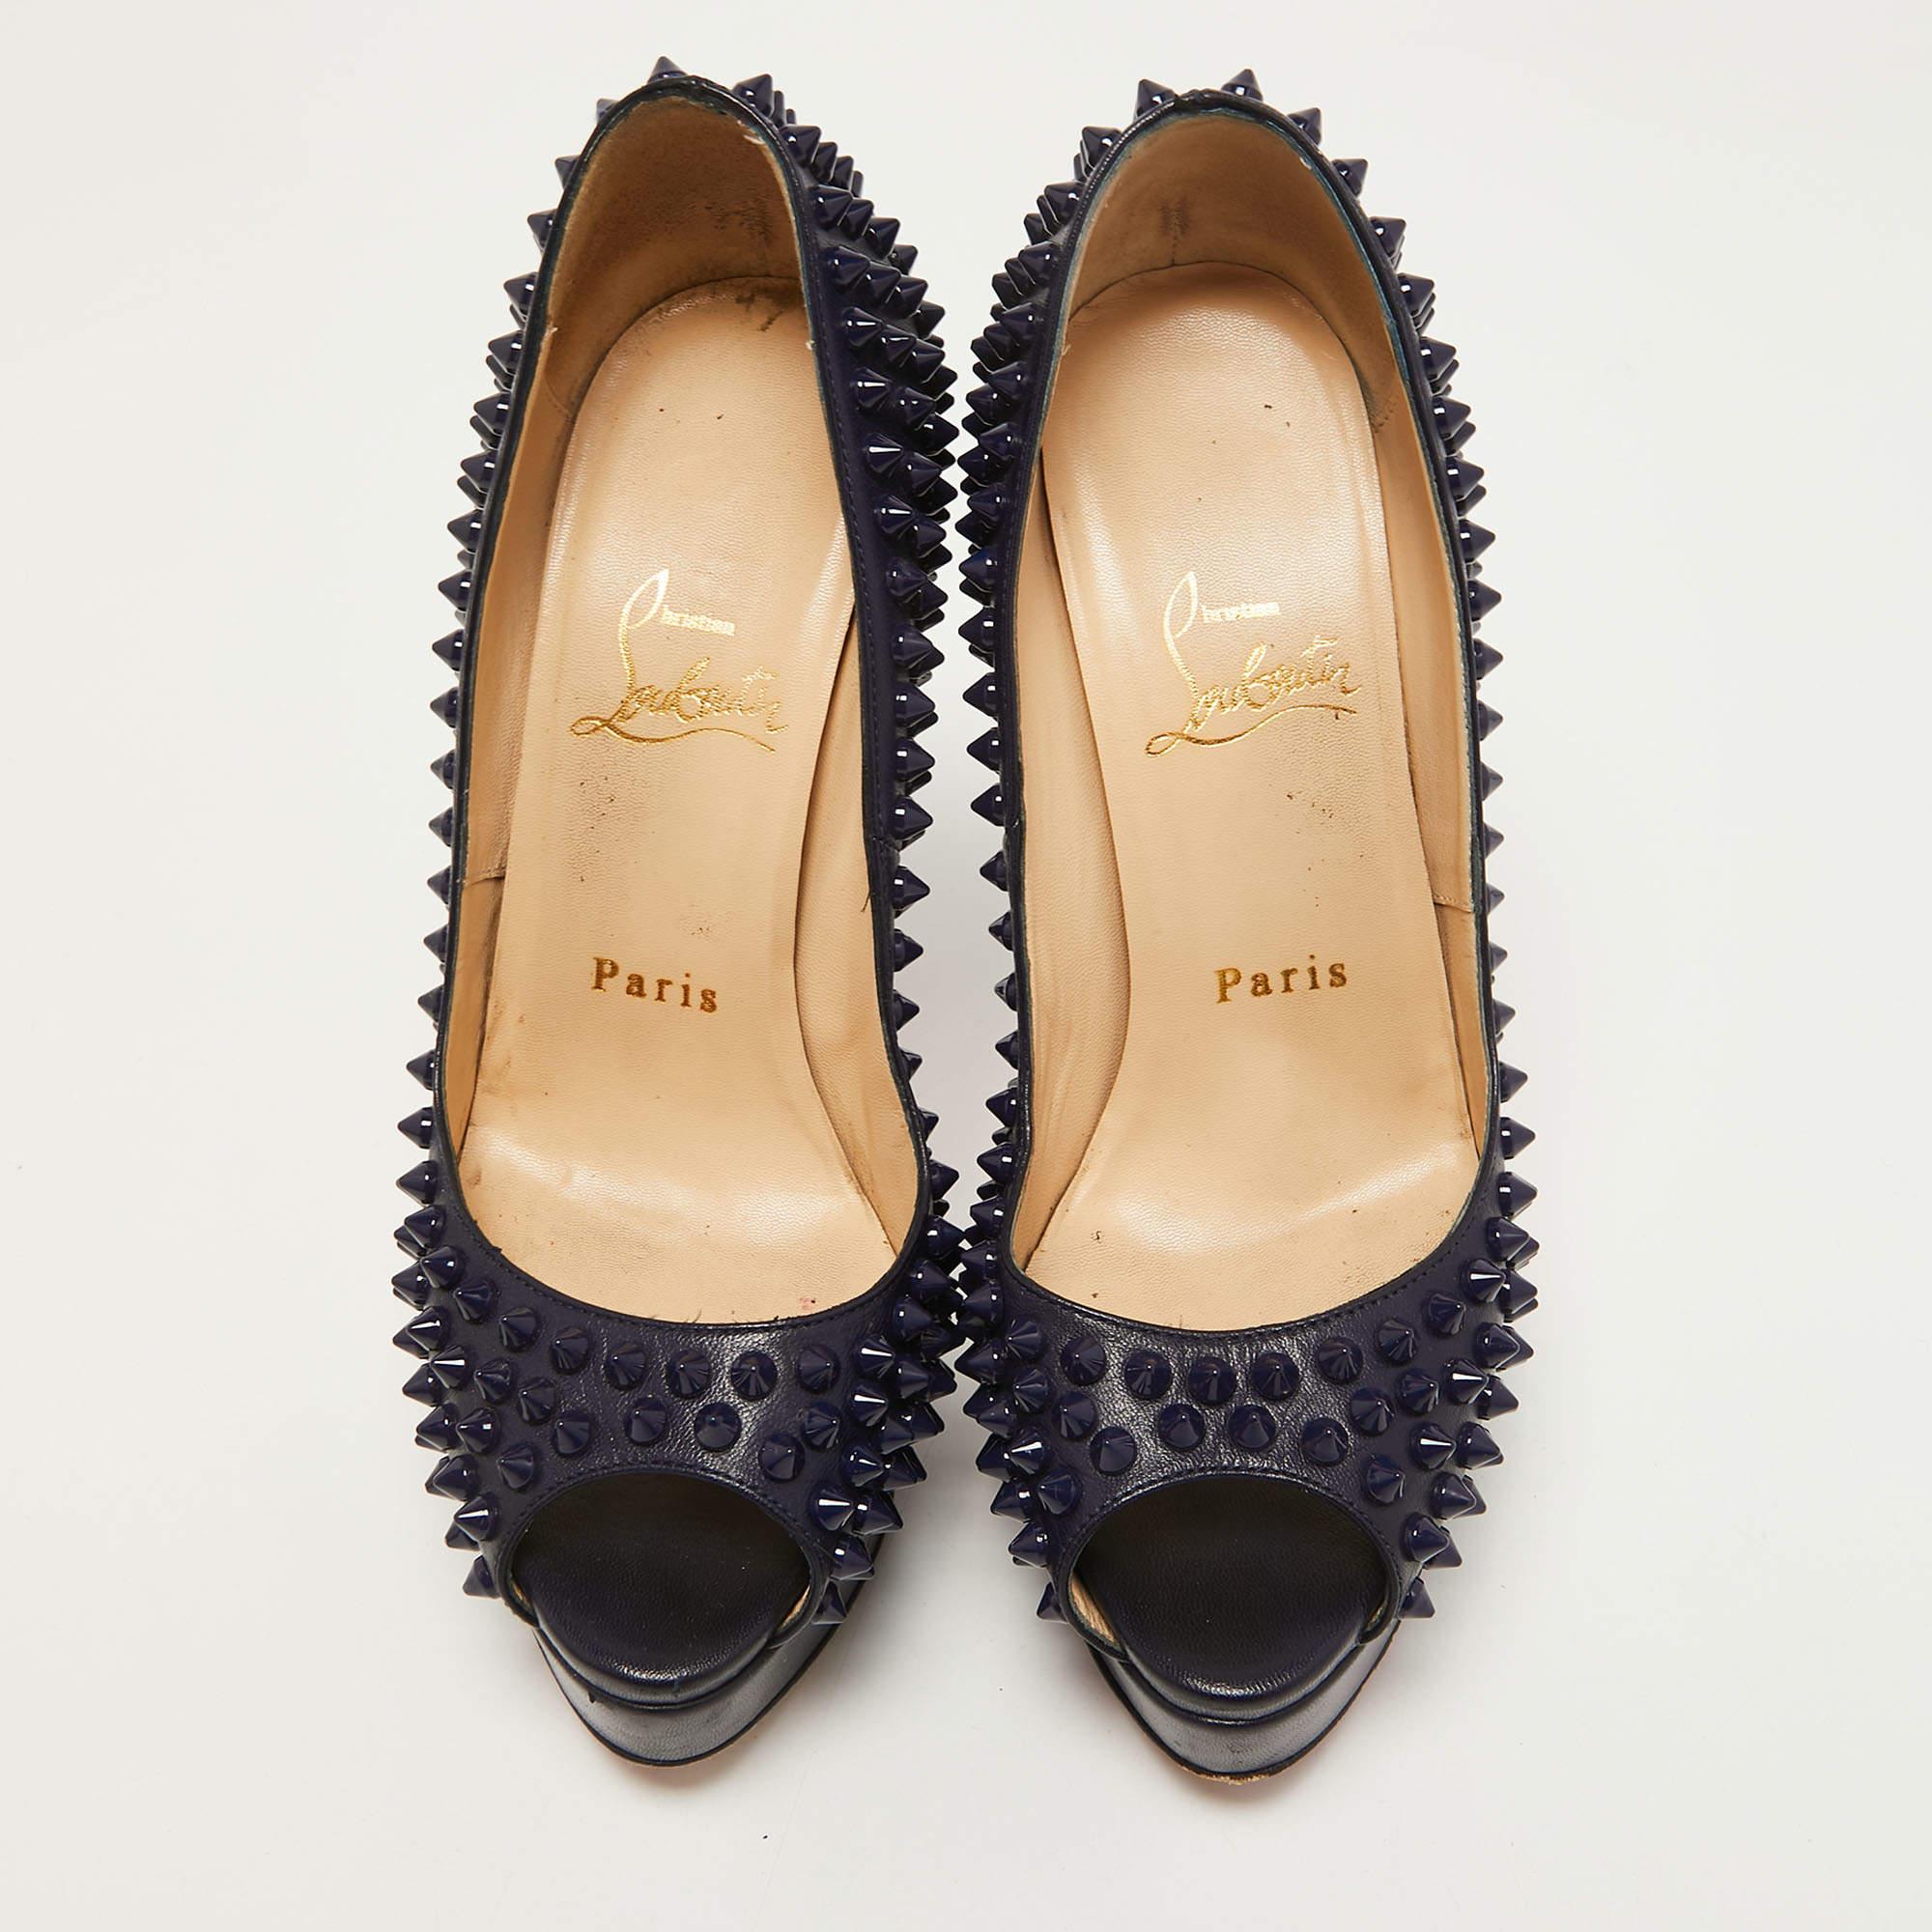 Exhibit a bold style with this pair of pumps. These CL Lady Peep pumps are crafted from quality materials. They are set on durable soles and sleek heels.

Includes: Original Dustbag, Original Box

